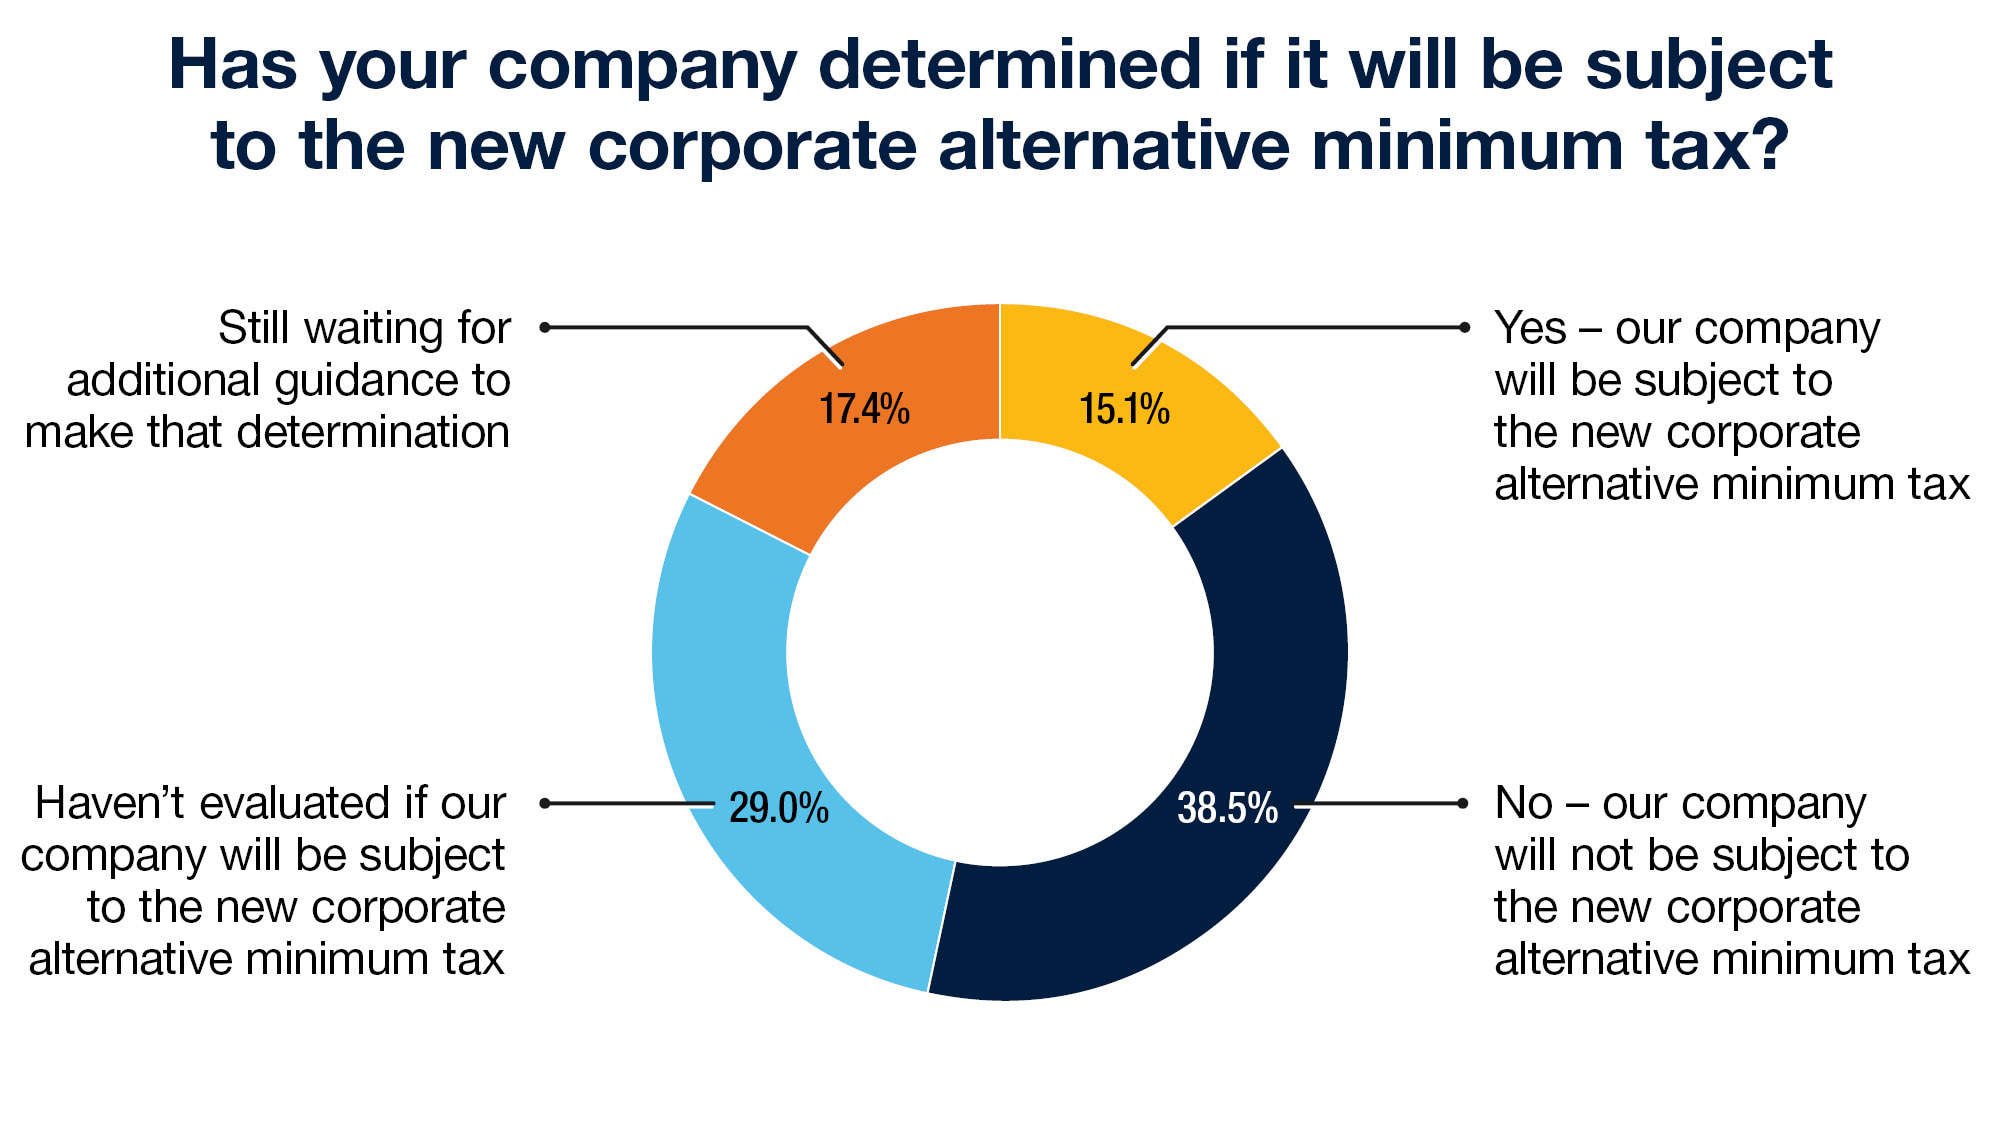 Has your company determined if it will be subject to the new corporate alternative minimum tax? 